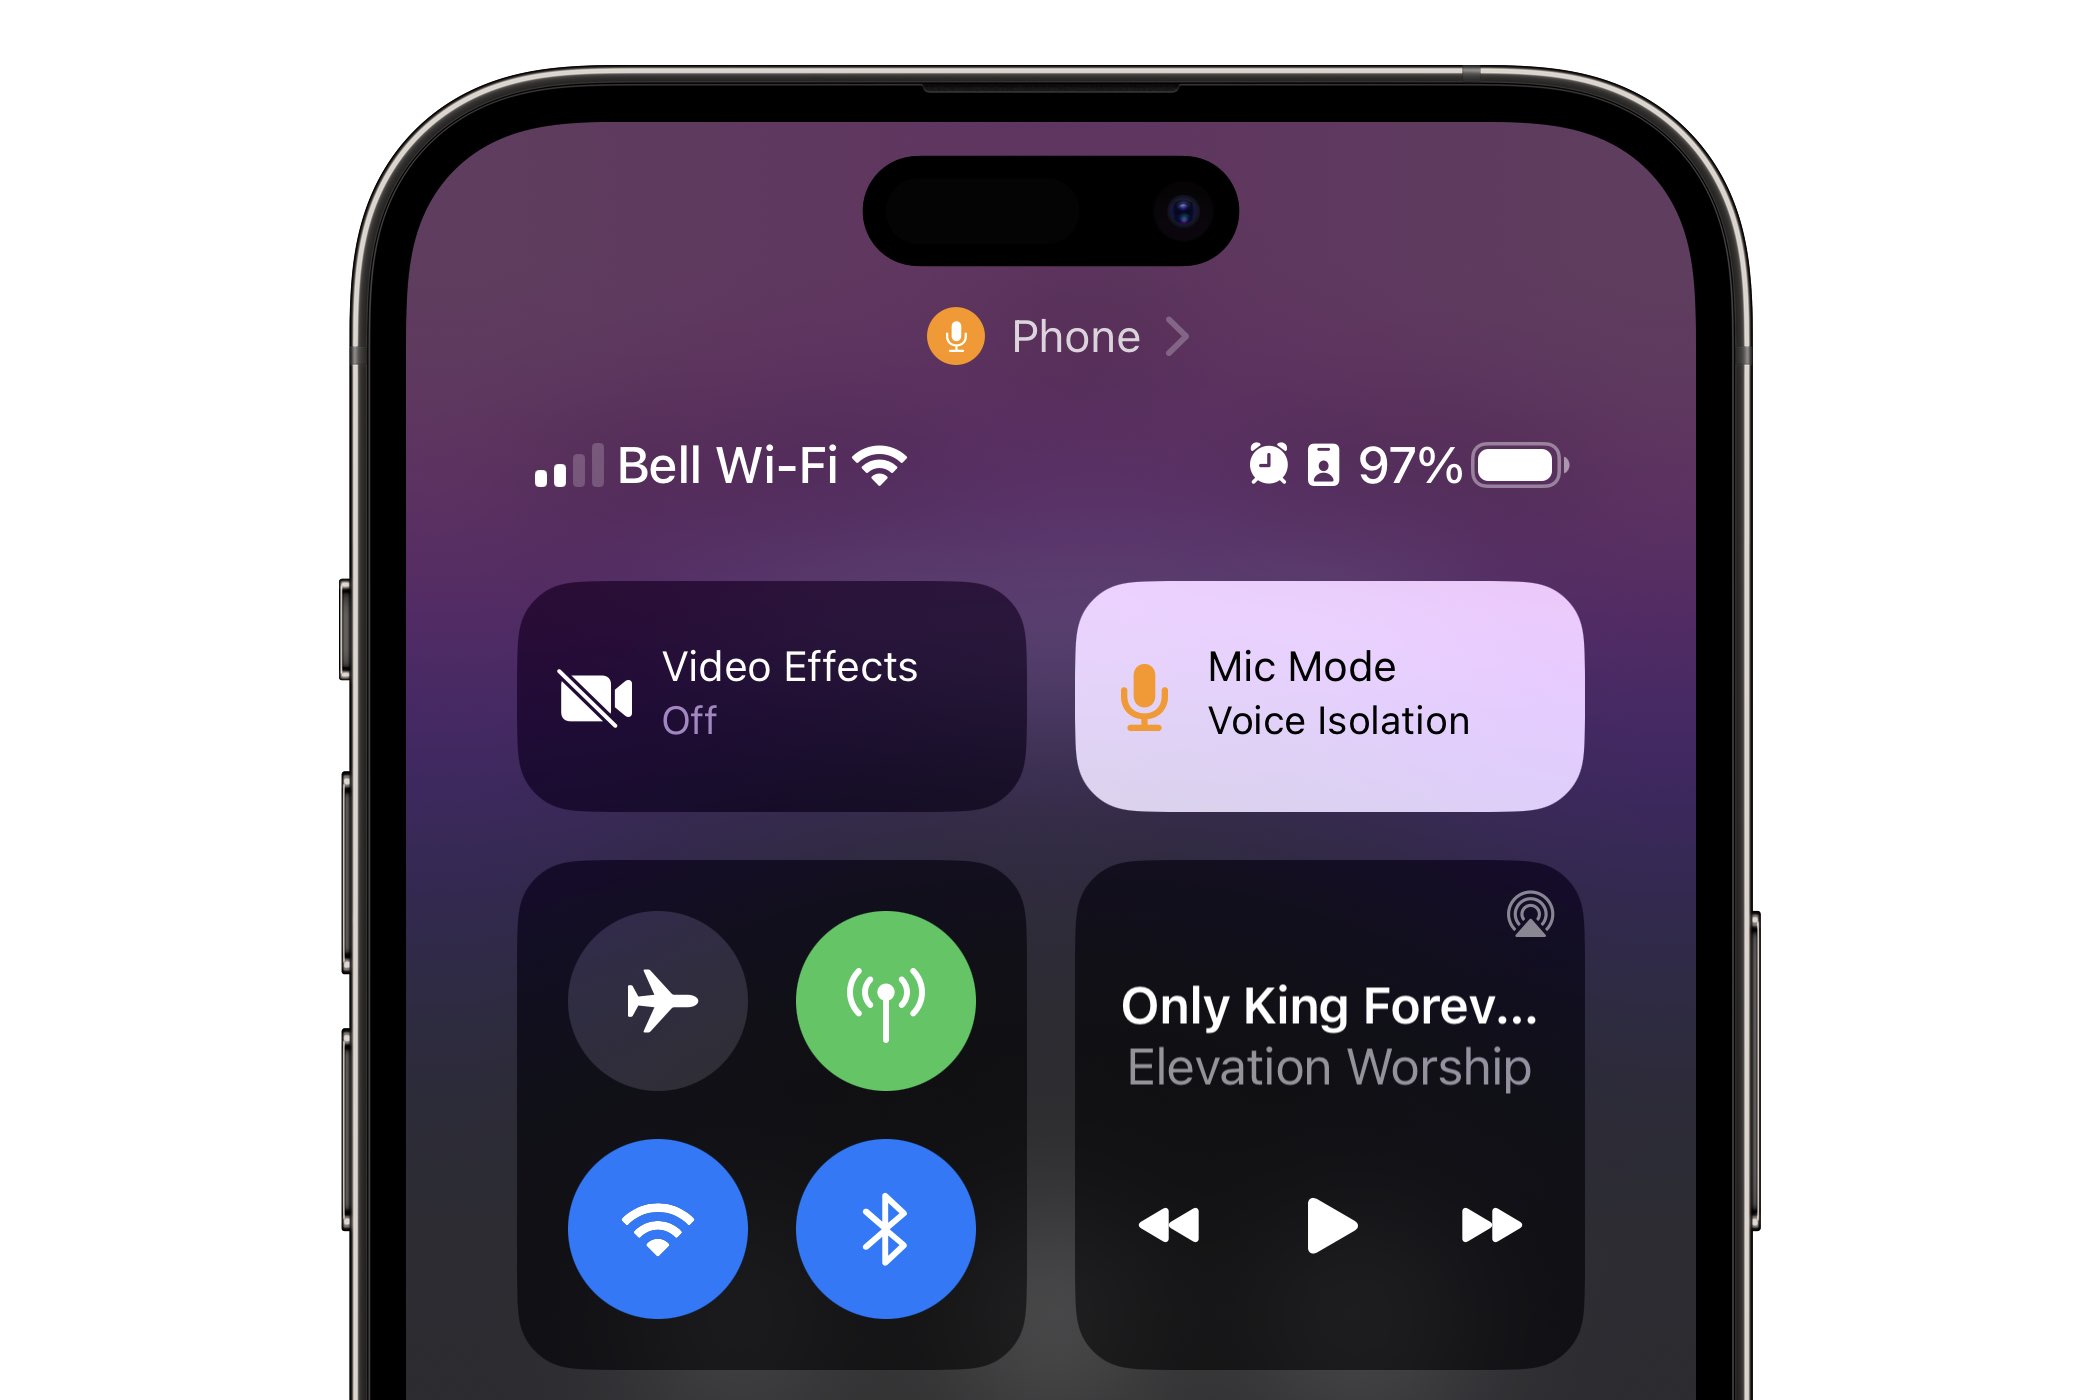 iOS 16.4 Control Center on iPhone showing Wide Spectrum Mic Mode.